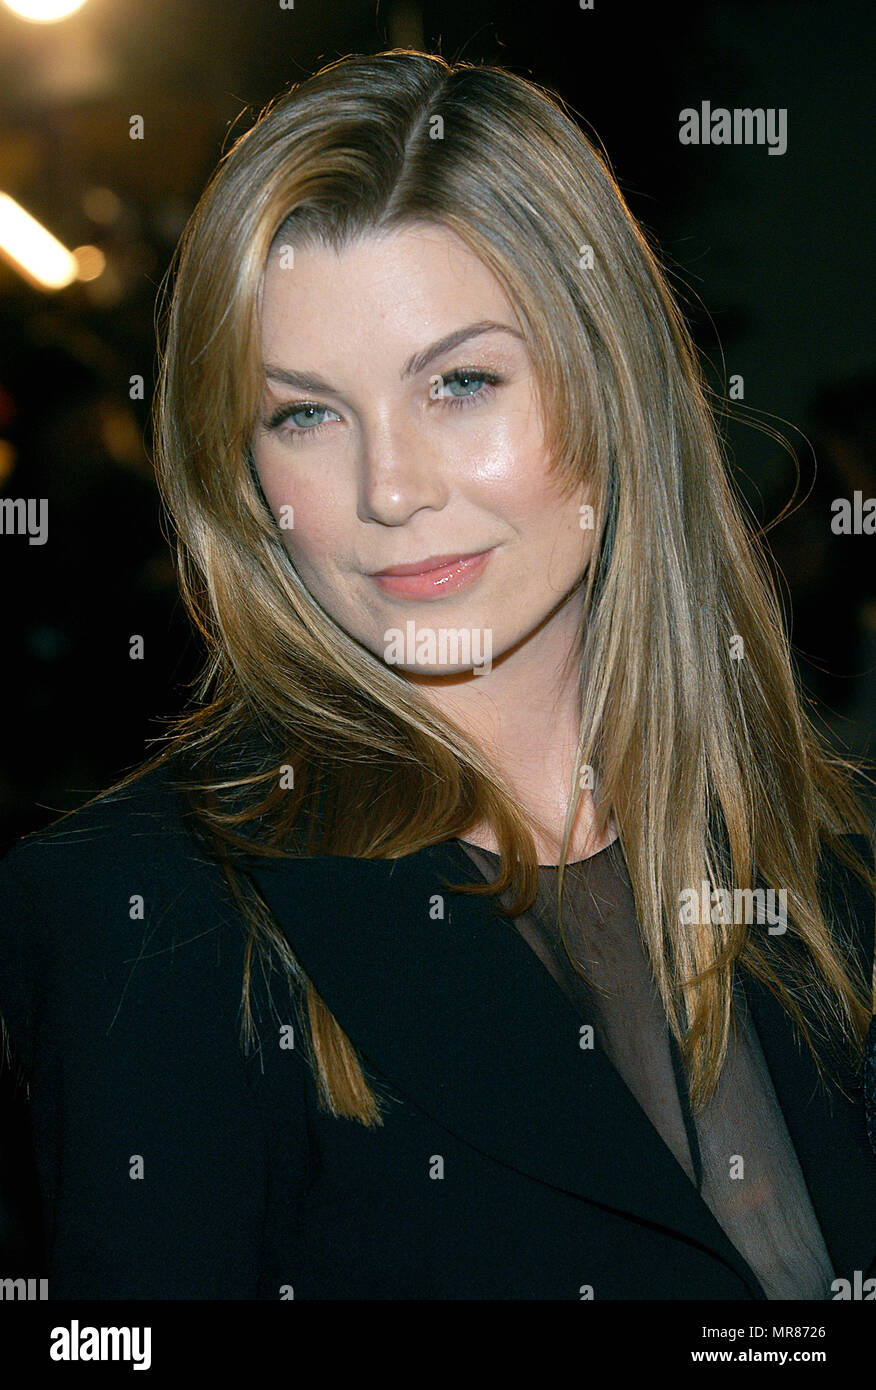 Ellen Pompeo arriving at the premiere of "Catch Me If You Can" at the Mann  Village Theatre in Los Angeles. December 16, 2002. PompeoEllen102 Red  Carpet Event, Vertical, USA, Film Industry, Celebrities,